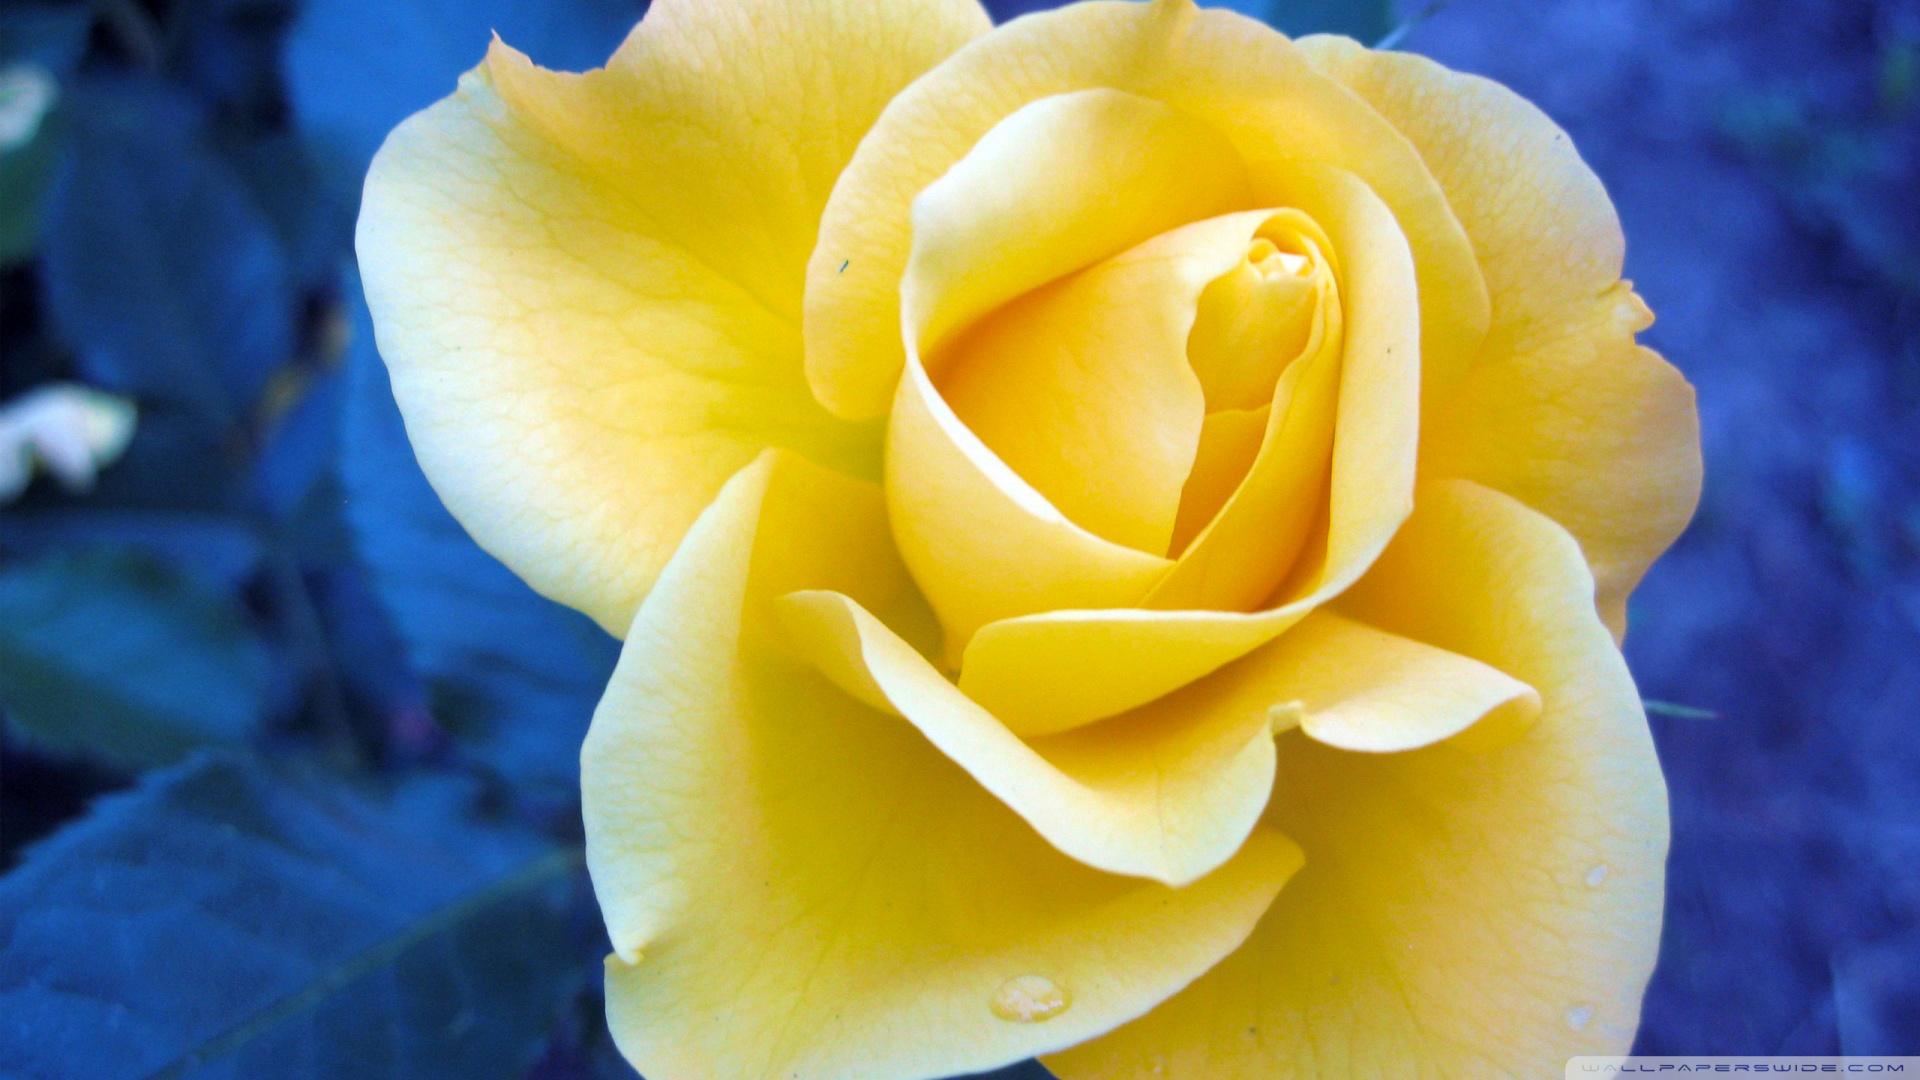 Yellow Background Wallpaper Blue Against Rose Image